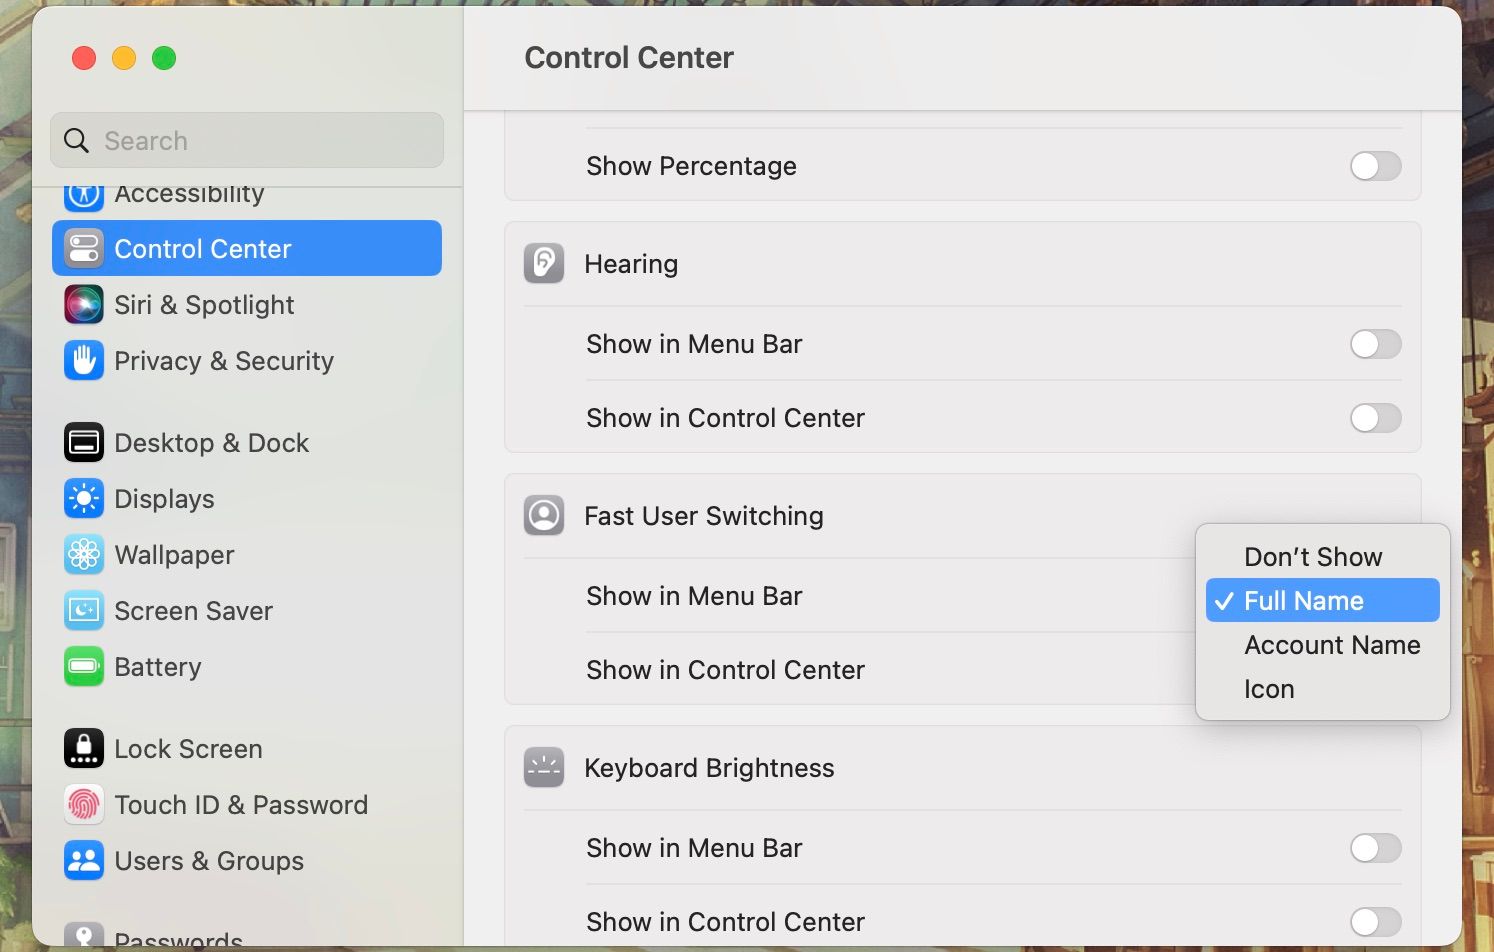 Control Center showing Fast User Switching menu bar options.